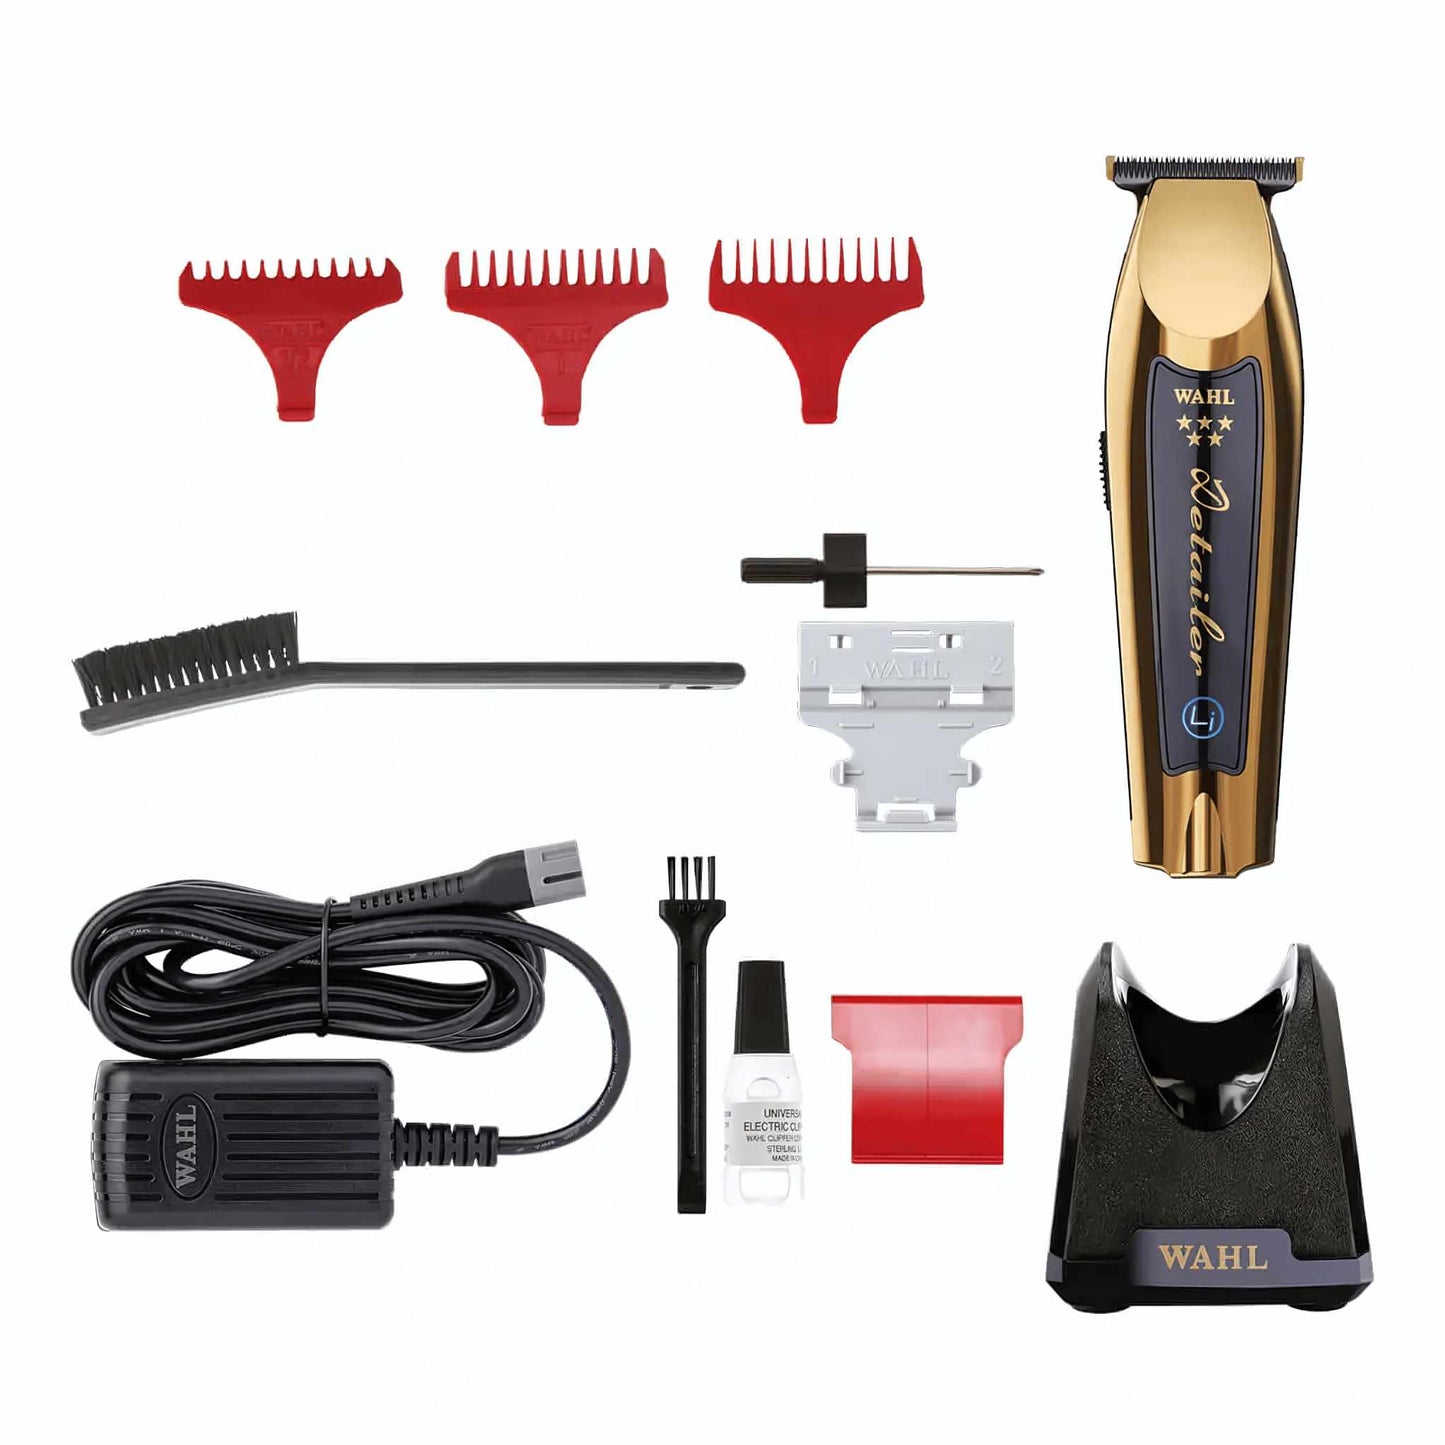 Wahl Trimmer Cordless Detailer Li with accesoires